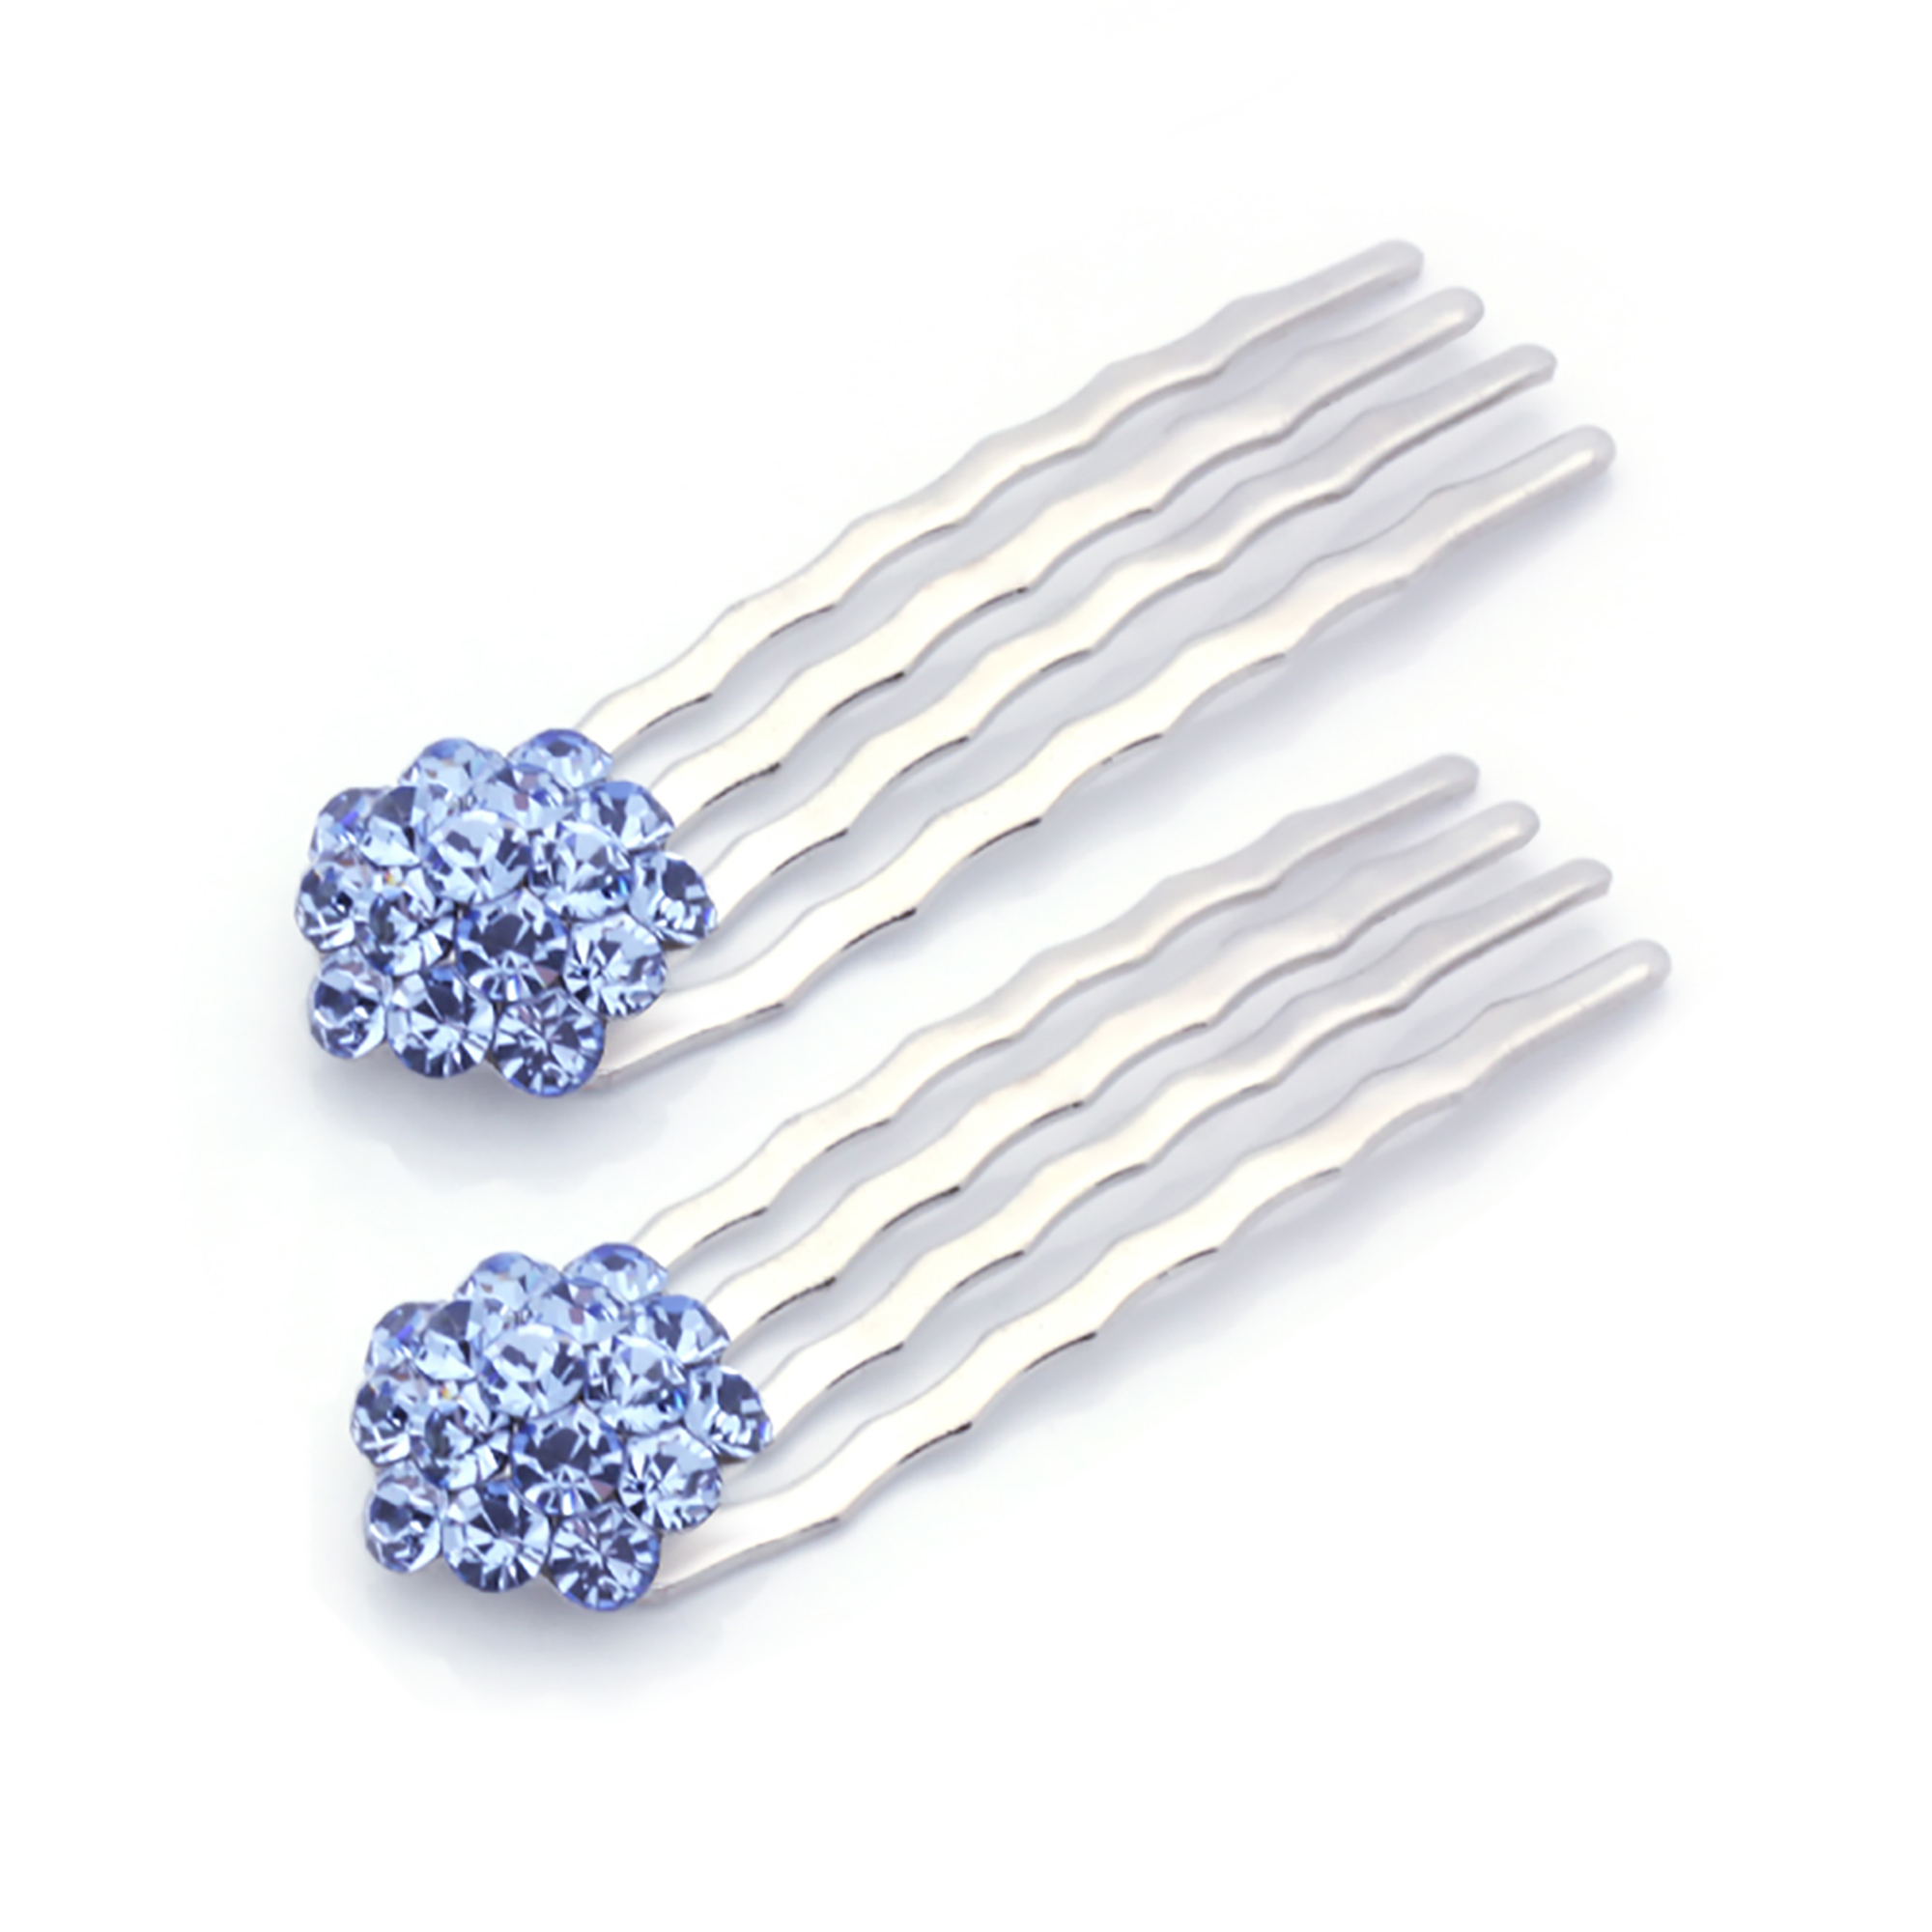 DoubleAccent Hair Jewelry Small Swarovski Crystal Cluster Mini Bridal Hair Comb Set of Two Blue Color